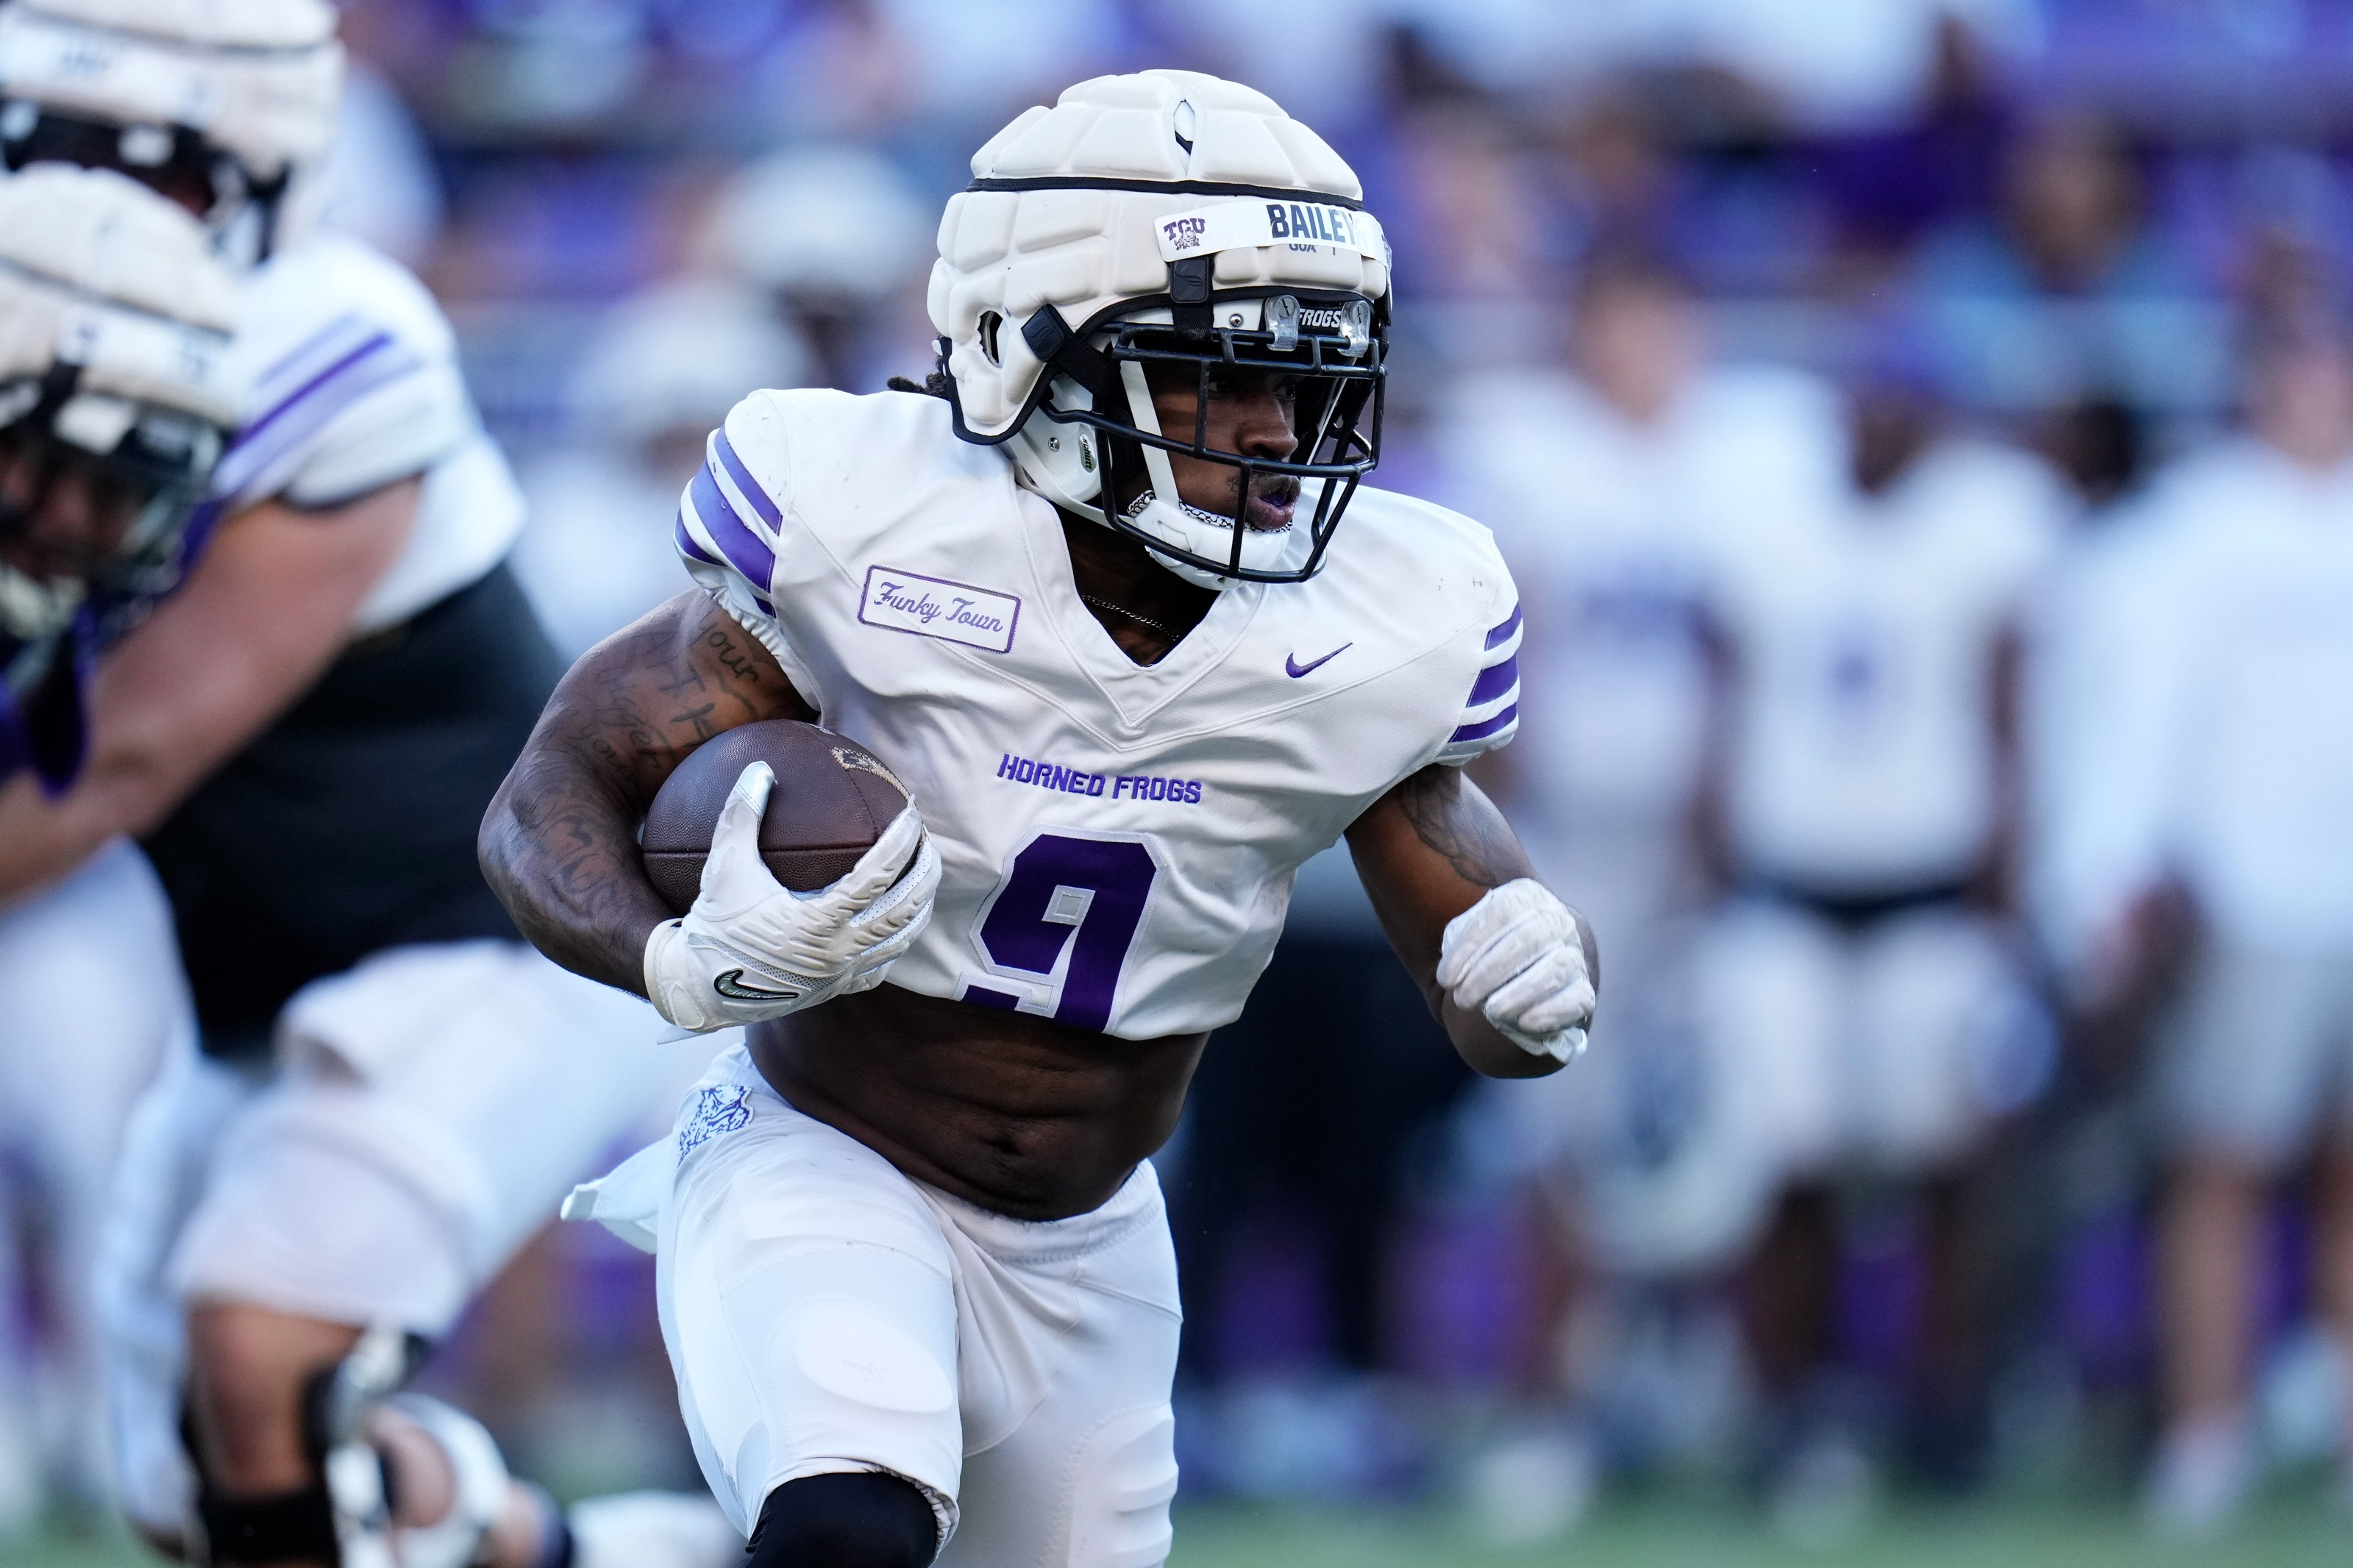 college football picks Emani Bailey TCU Horned Frogs predictions best bet odds